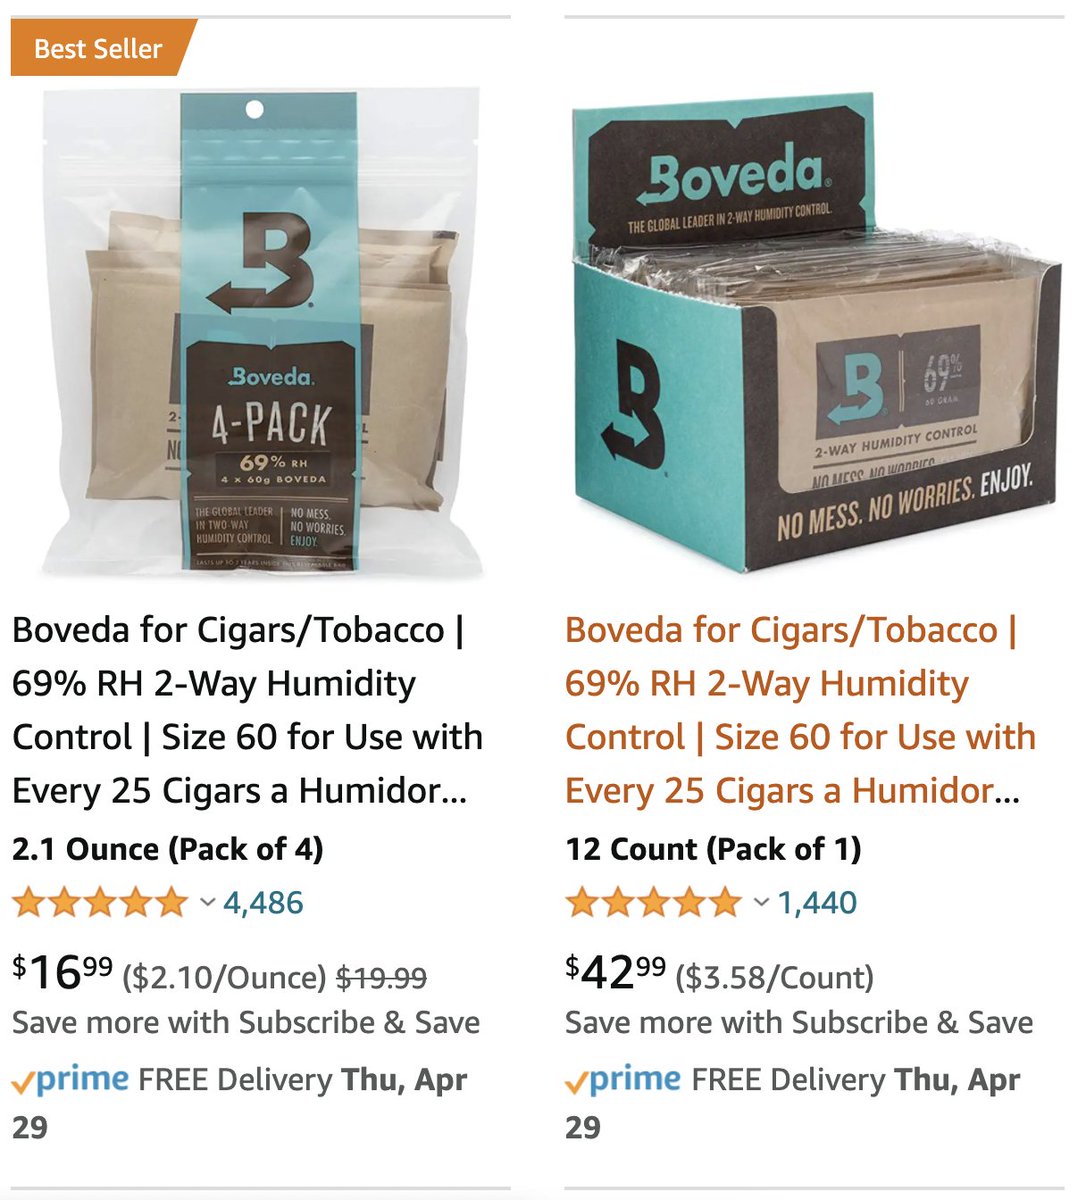 Buy the Bovida packs right on Amazon. I order these 10 packs of larger ones because I now have a collection of 500+ cigars, but a small one works too if you just order a few.